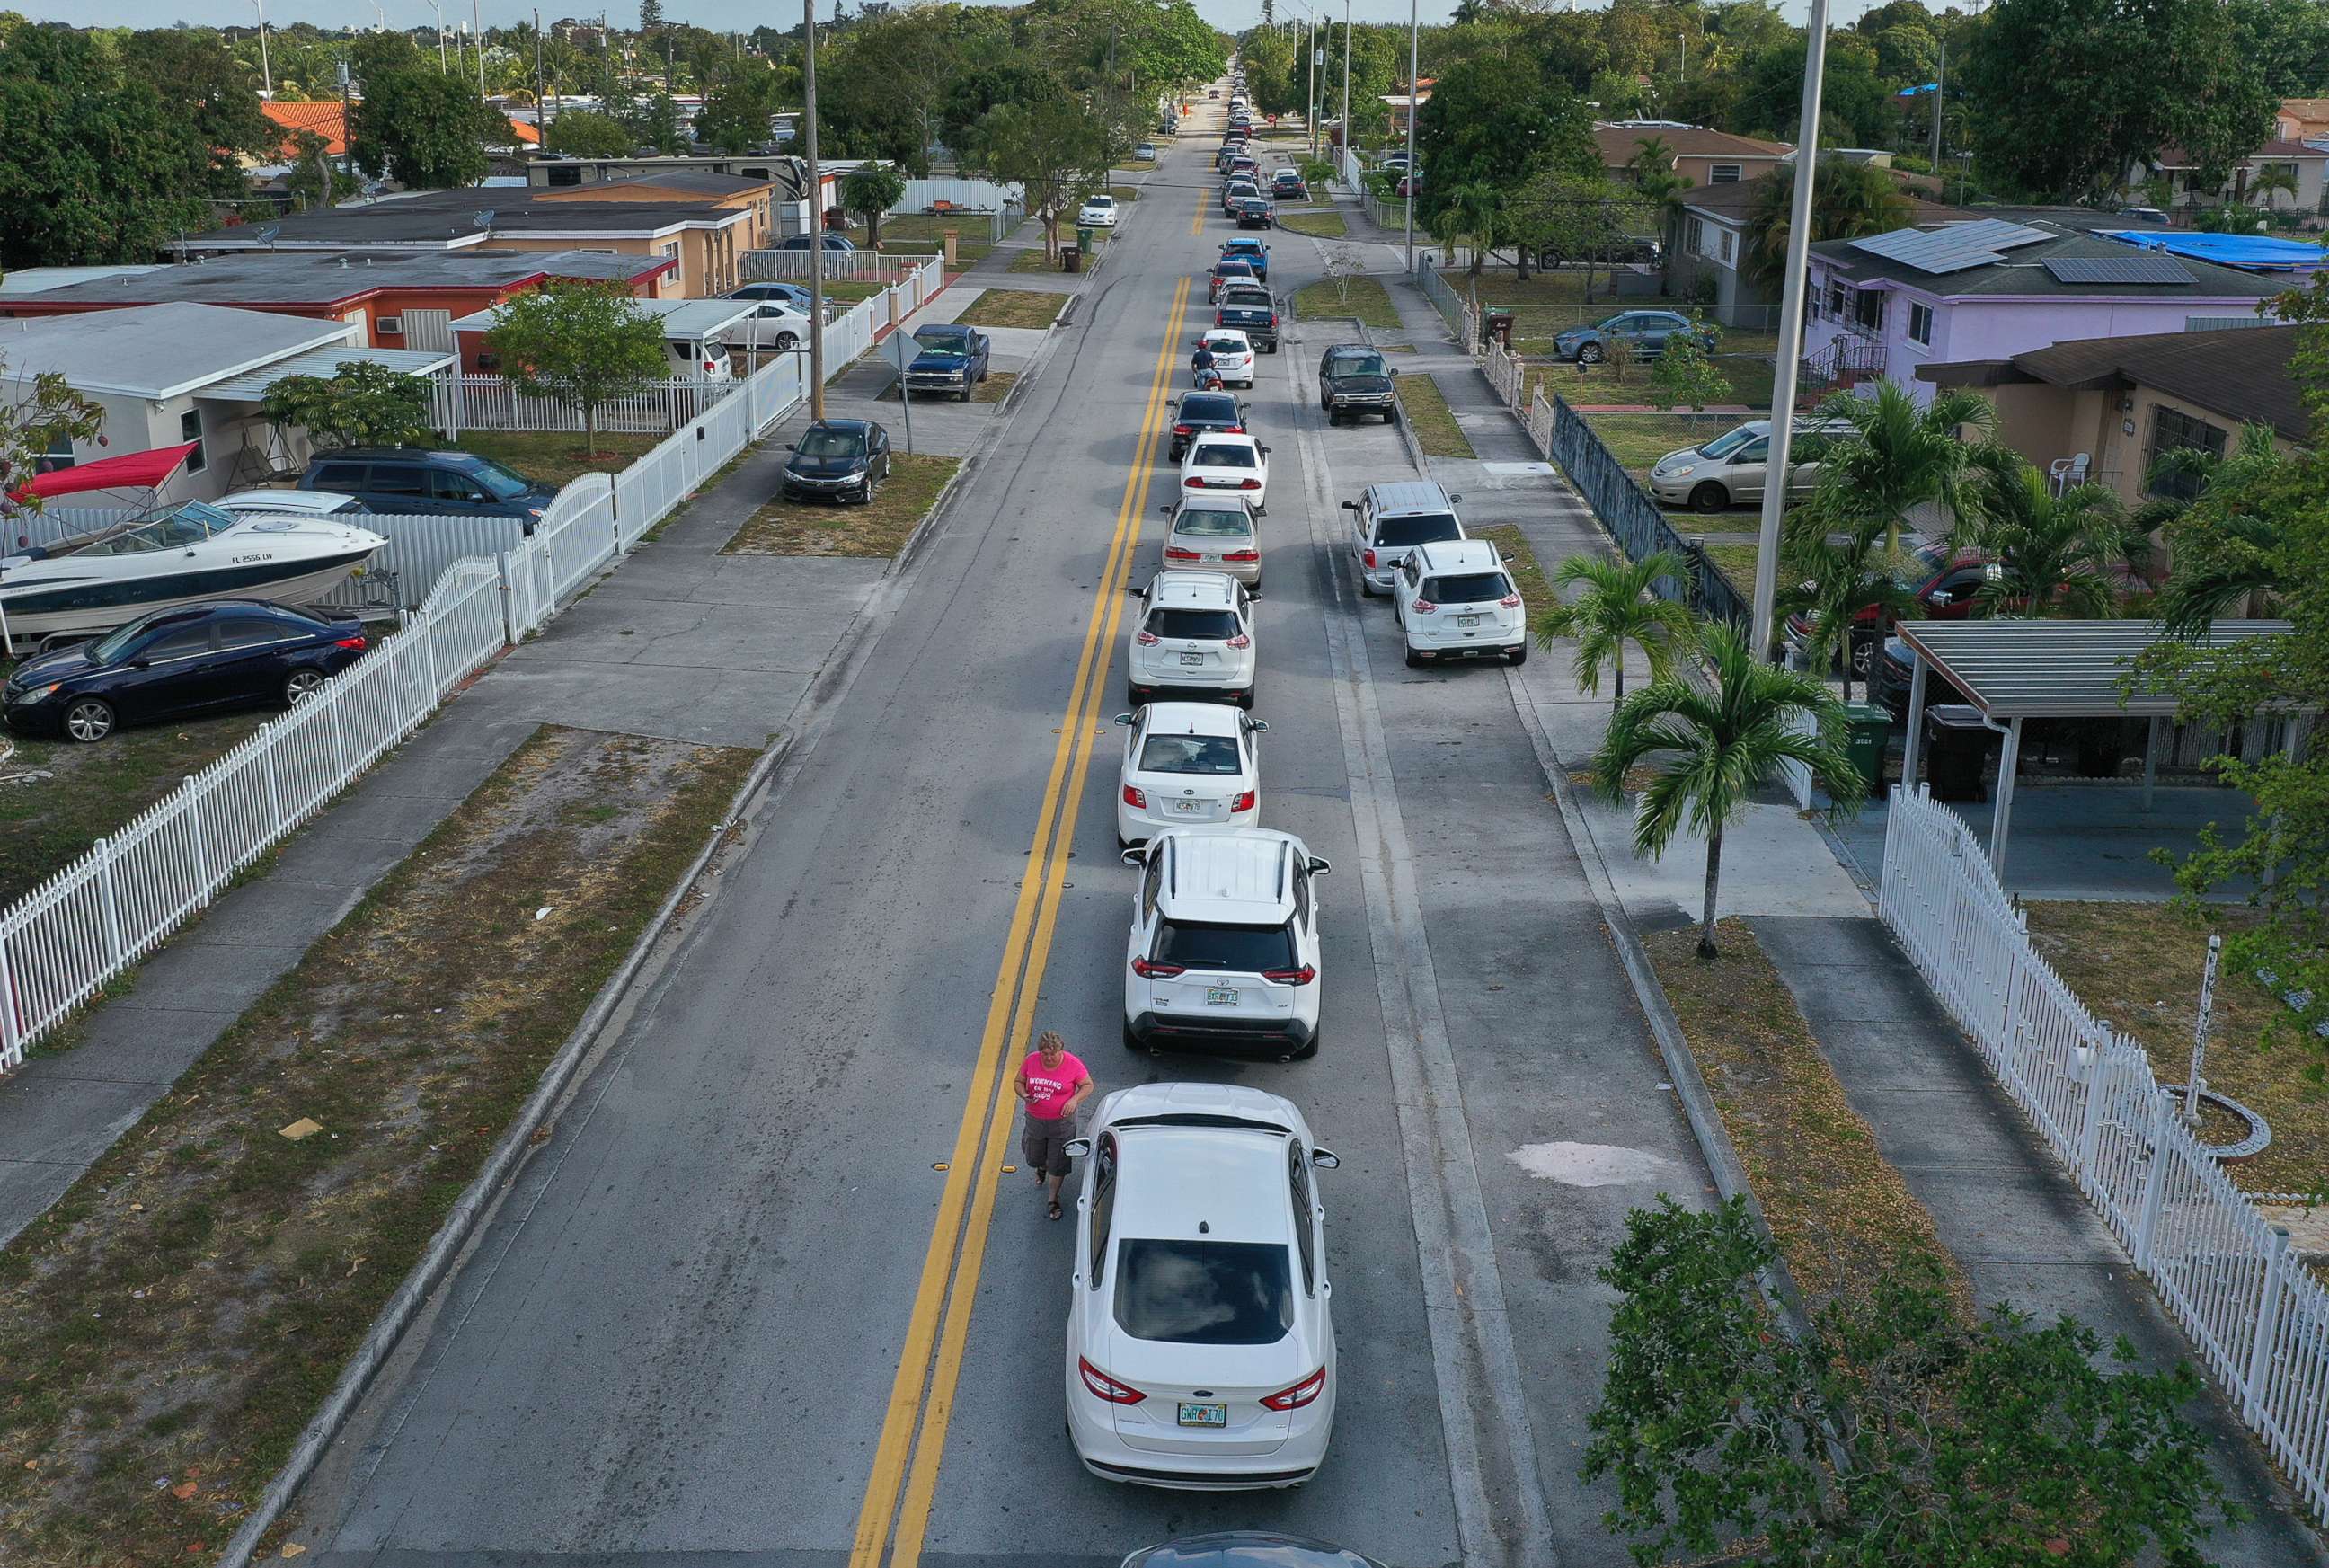 PHOTO: An aerial view from a drone shows vehicles lining up to receive unemployment applications being given out by City of Hialeah employees in front of the John F. Kennedy Library on April 8, 2020 in Hialeah, Fla.